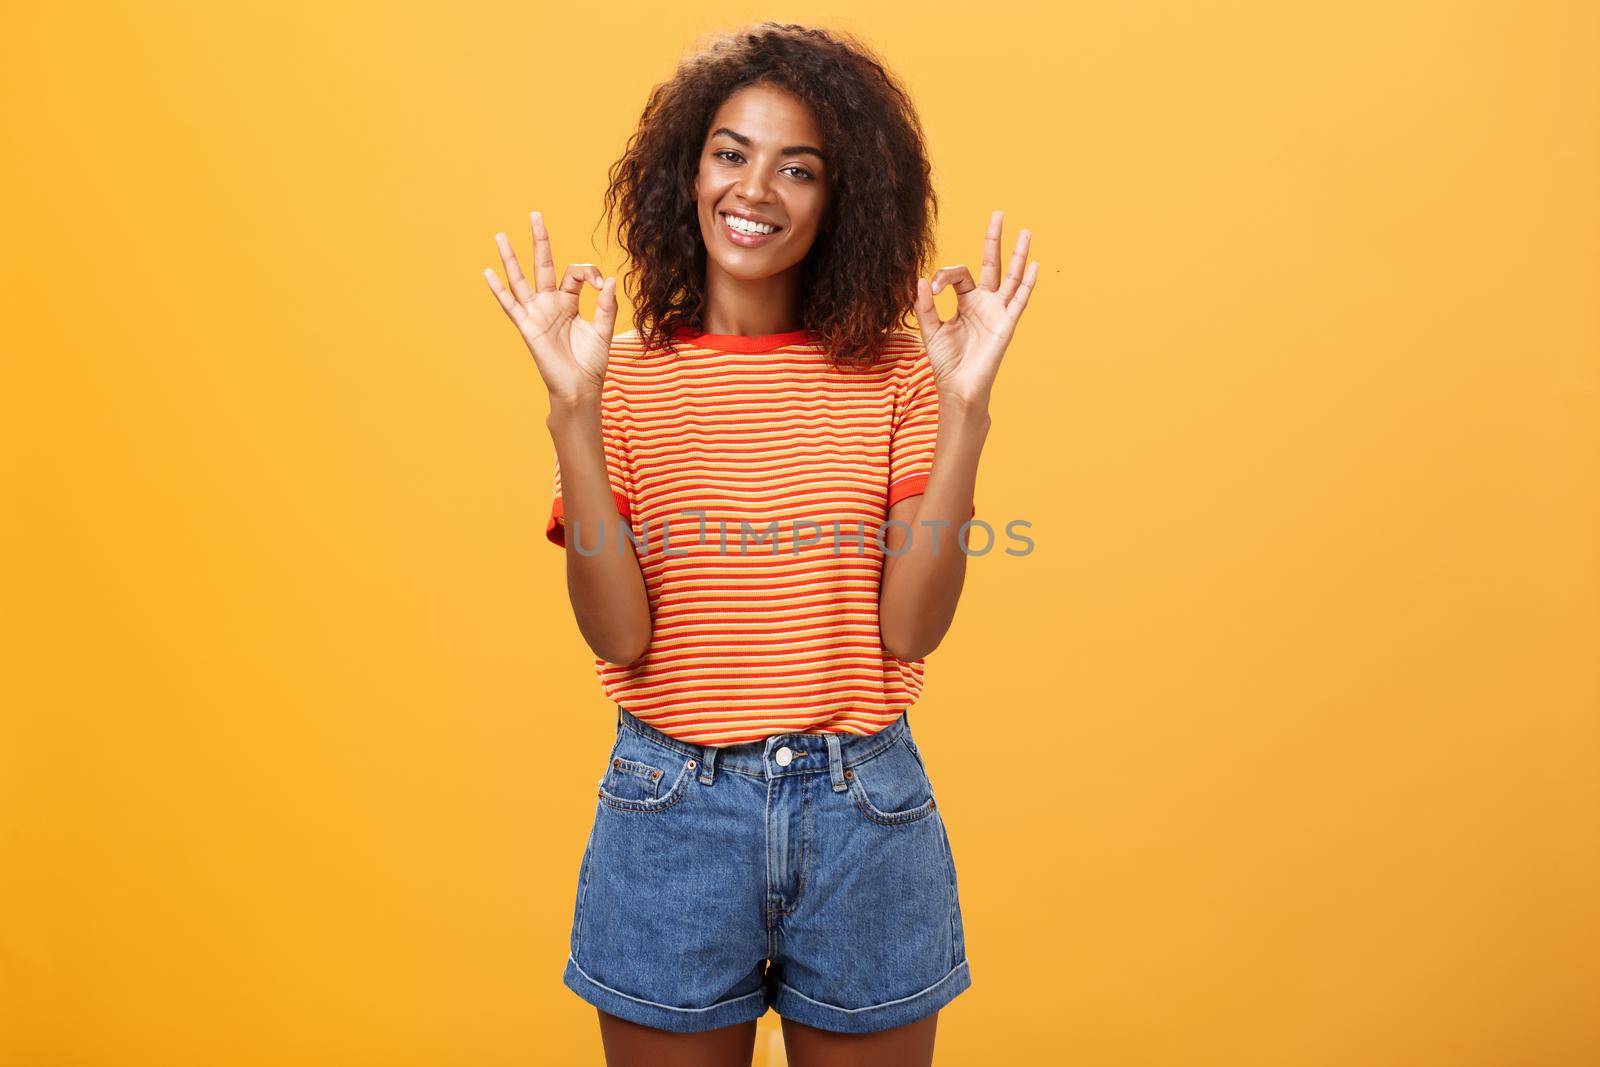 Chill attractive satisfied african american female customer picking new outfit being delighted and pleased with cool staff raising hands in okay or awesome gesture smiling happily over orange wall. Lifestyle.